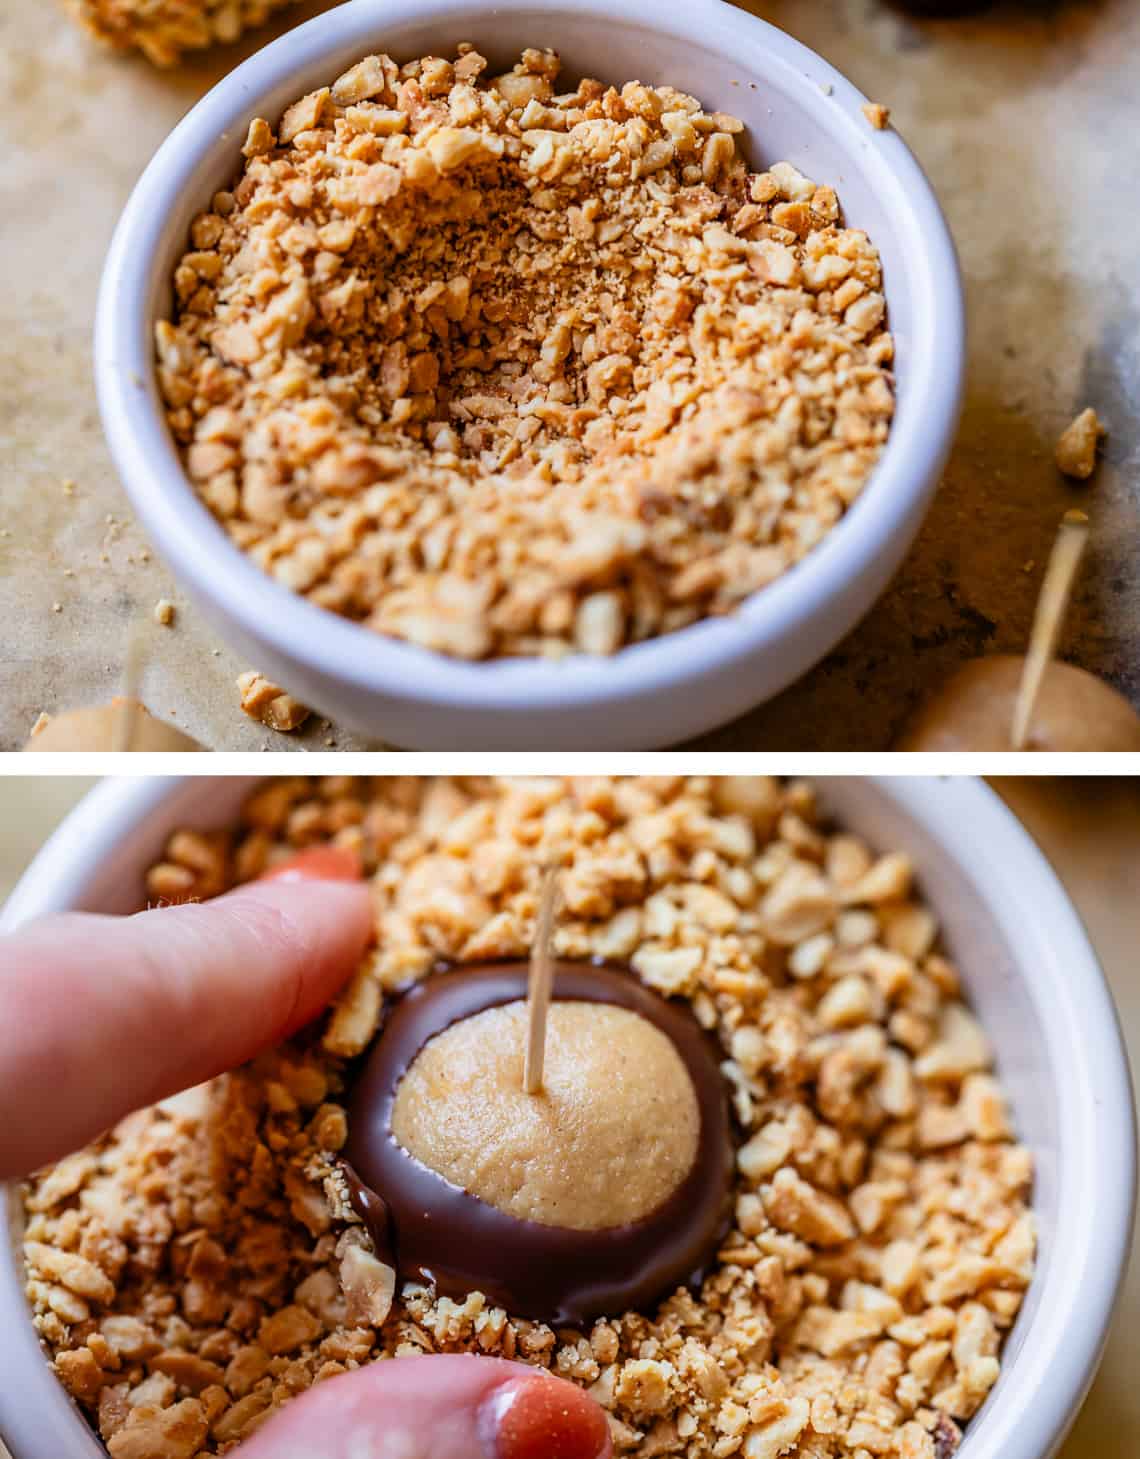 top little well made in a bowl of peanuts, bottom buckeye in the well and pressing nuts into the chocolate.